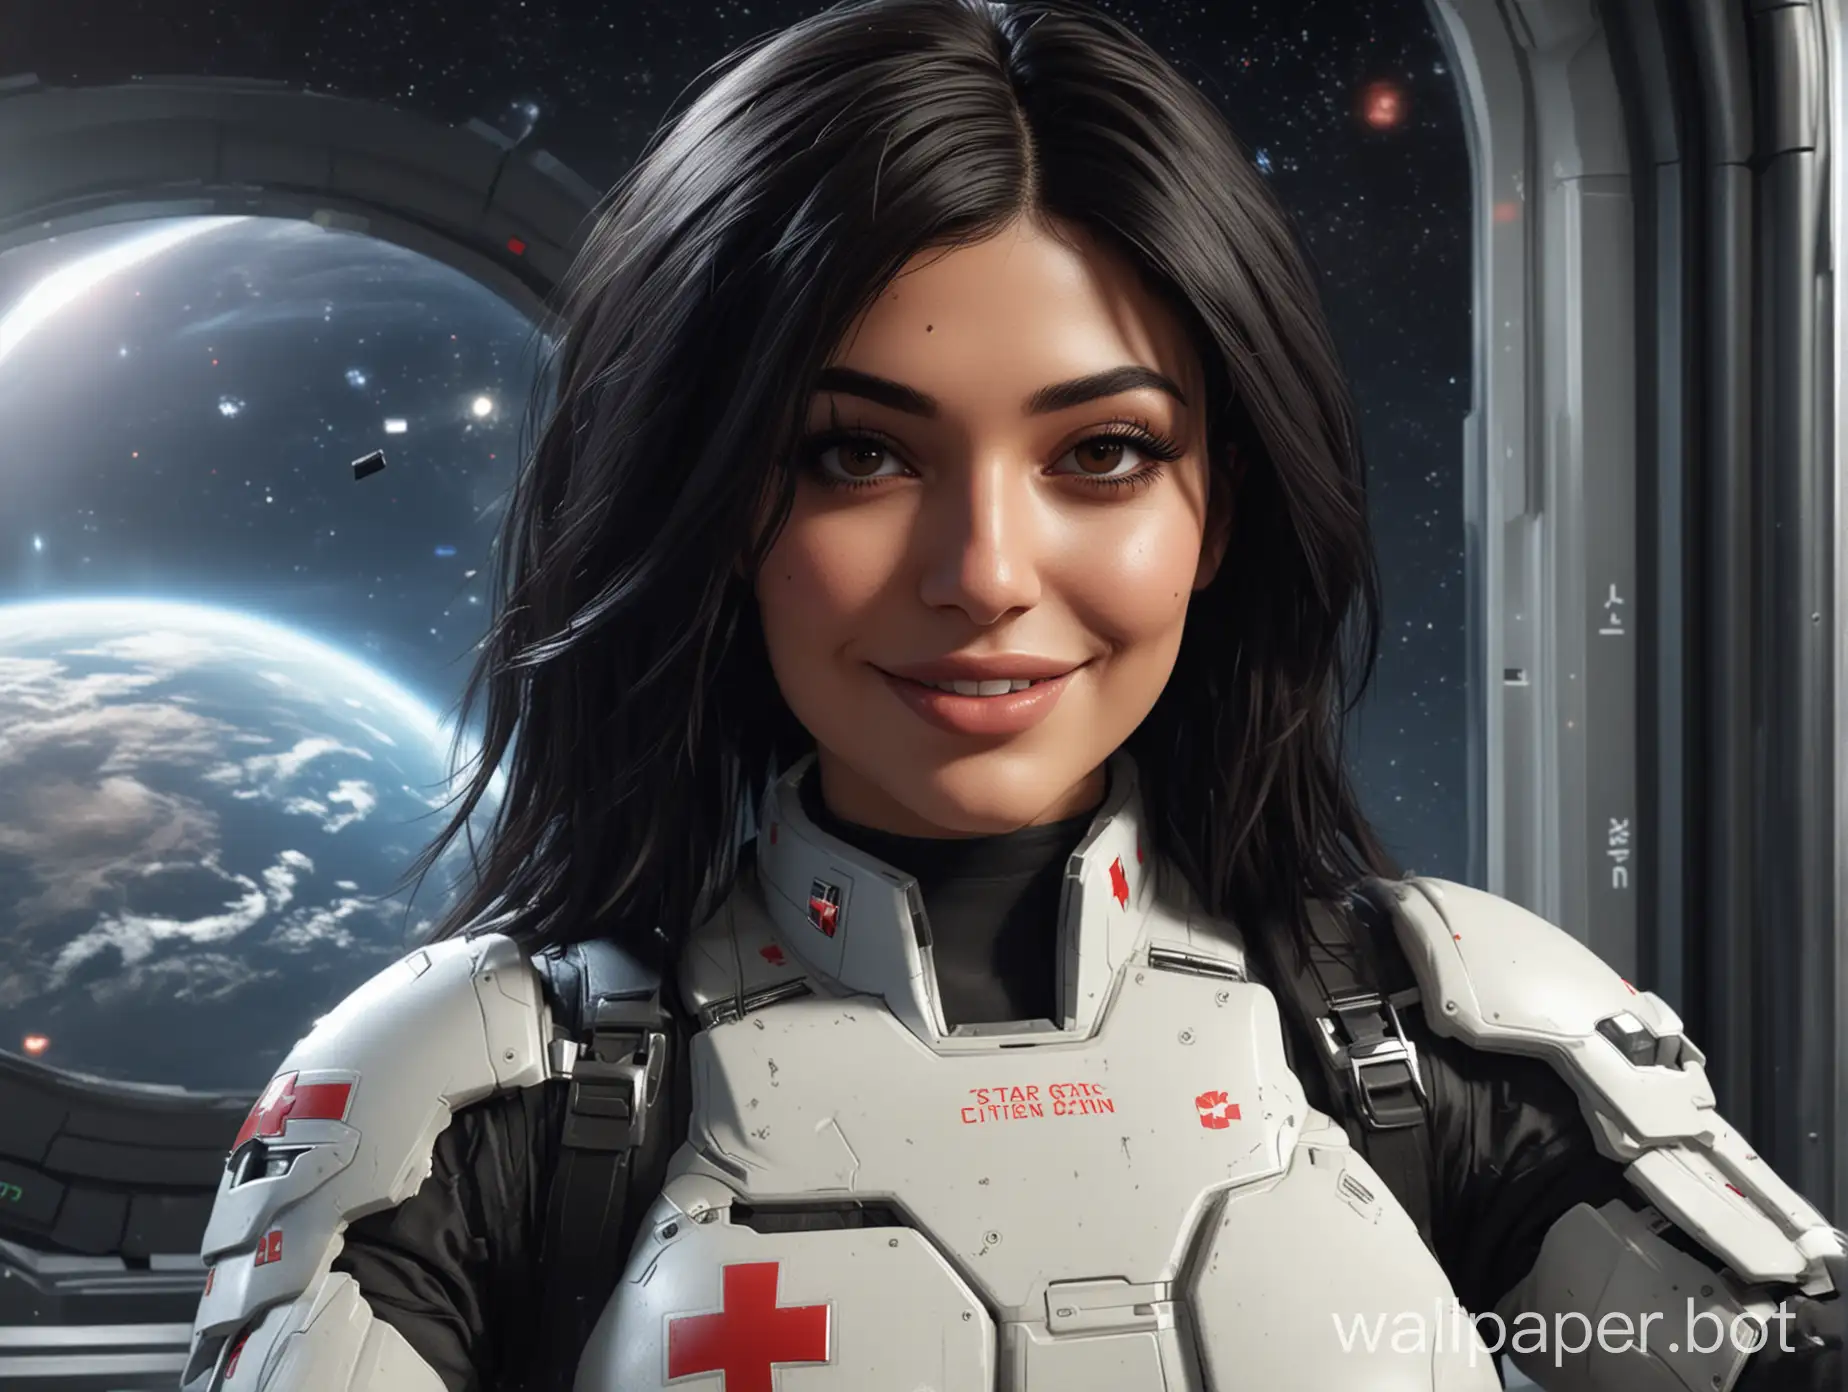 Star Citizen Universe, female with kylie jenner face taking selfie of herself,  Science-Fiction,  Medic, red cross, first aid , curvy female bodyshape, stars and planet through a window in the background, black shoulder long hair, natural black eyes, open smiling with showing teeth